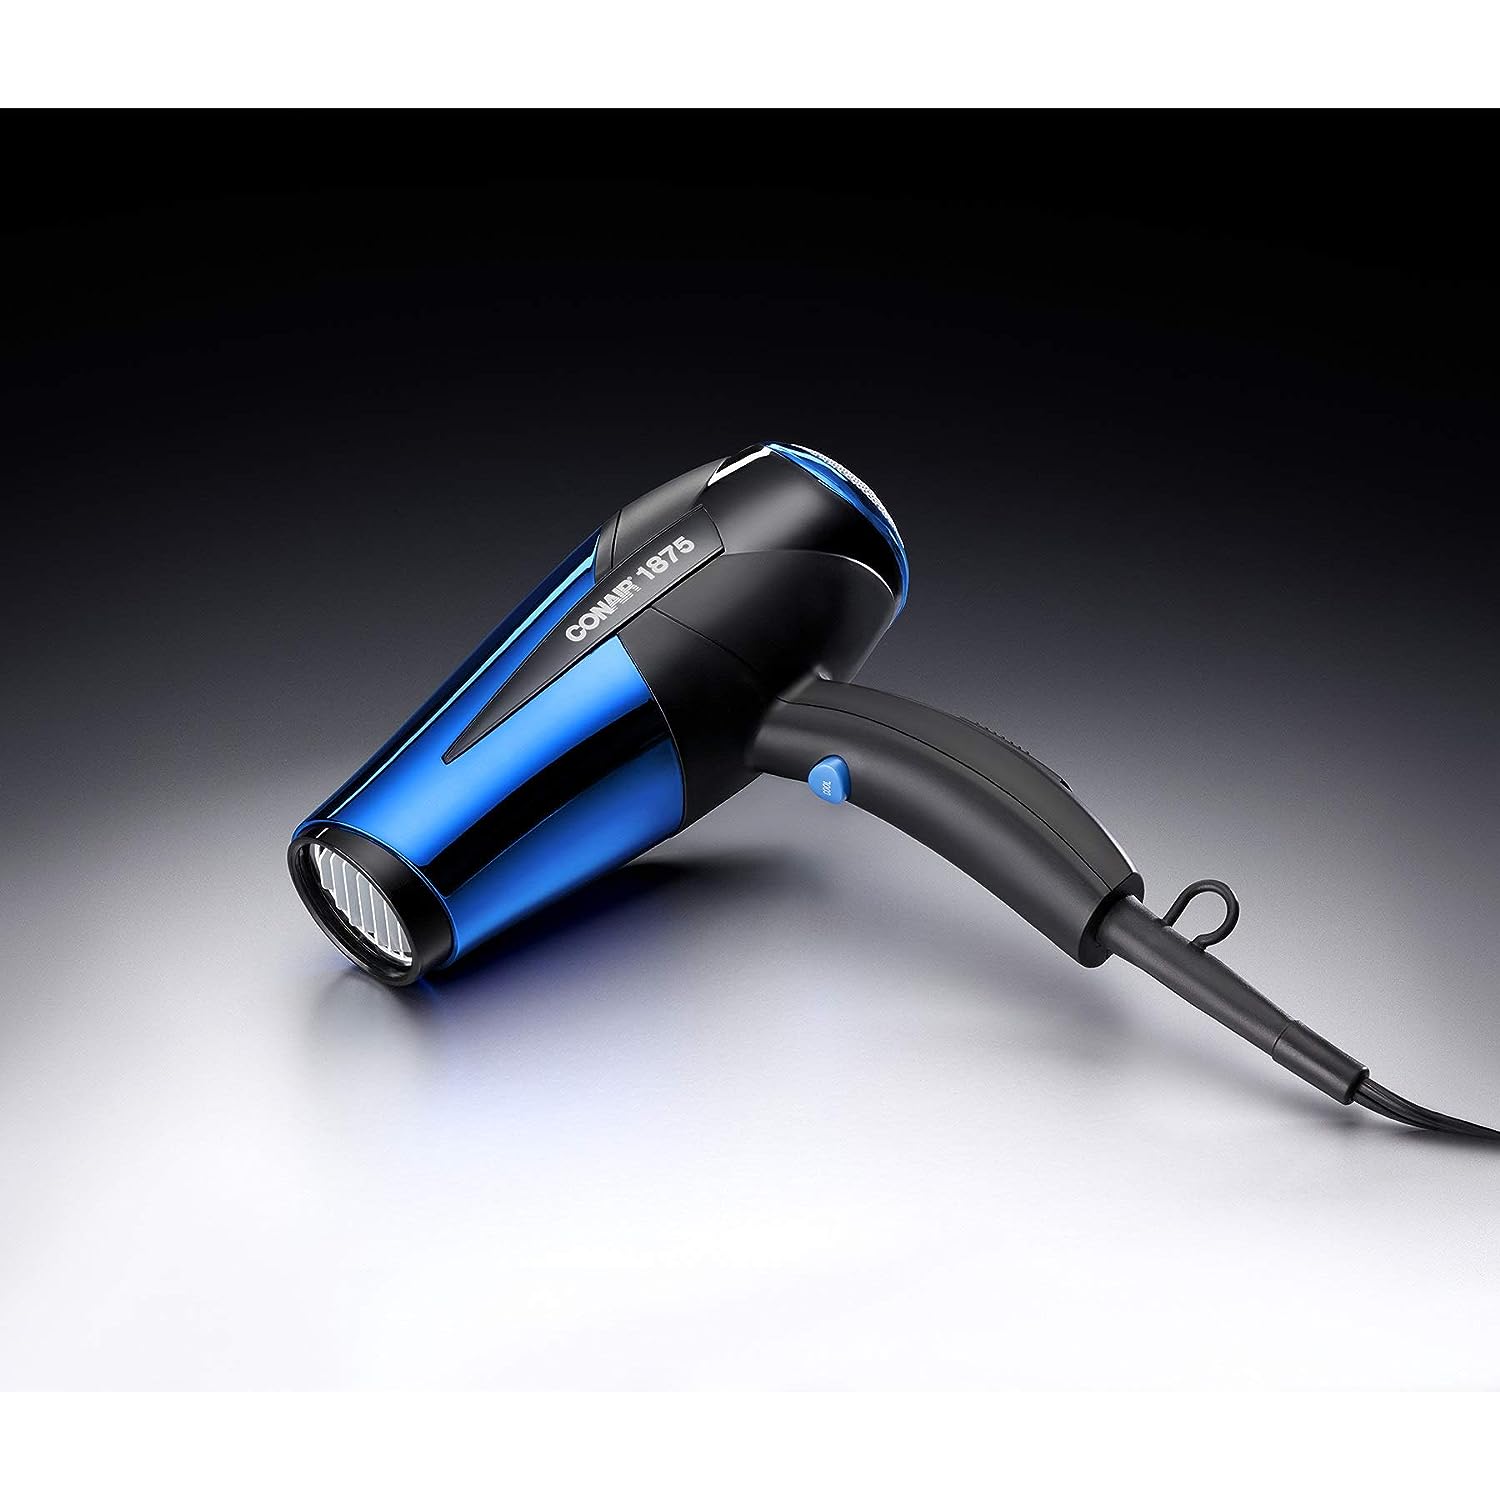 Conair Double Ceramic Dryer | Pick Up In Store TODAY at CVS